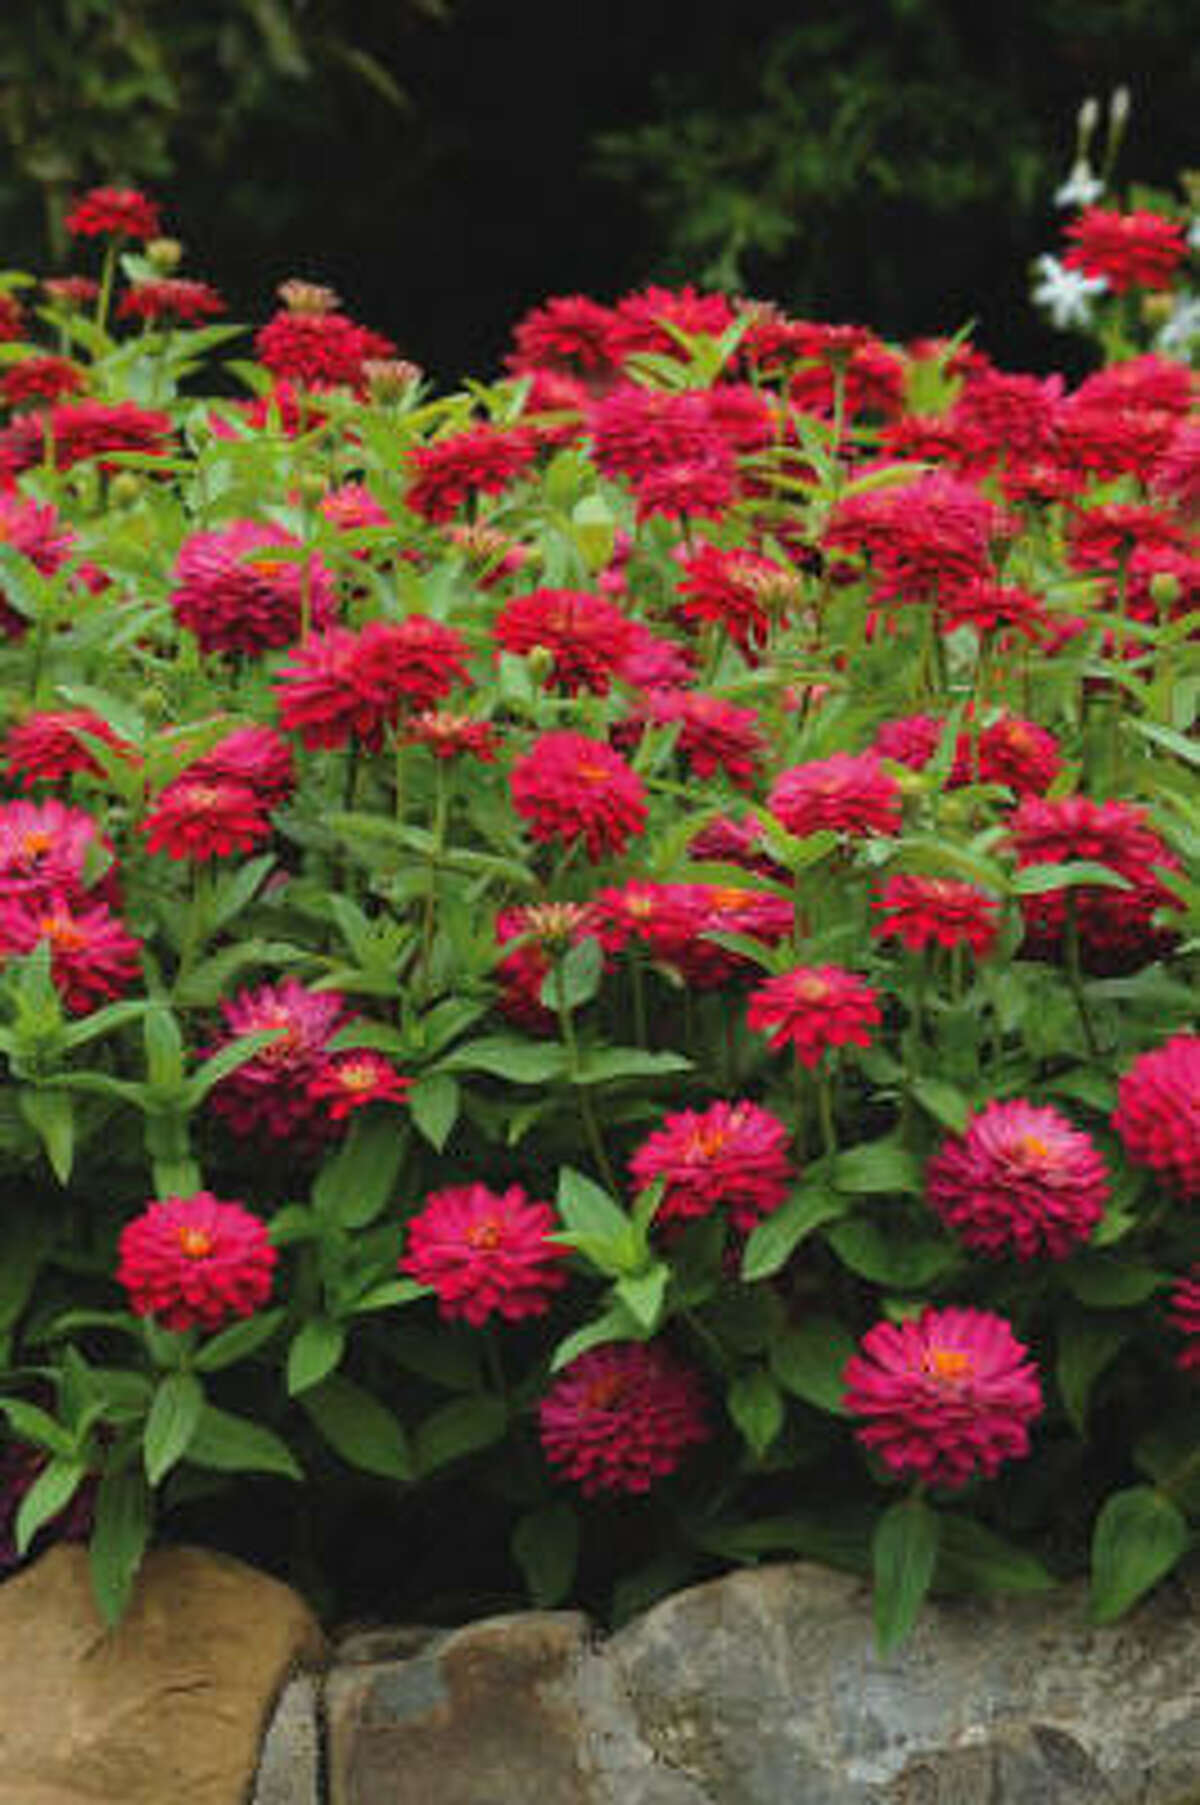 'Double Zahara Cherry' zinnia has plump 2 ½-inch blooms on 12-inch plants. This heat-tolerant sun lover is disease resistant.